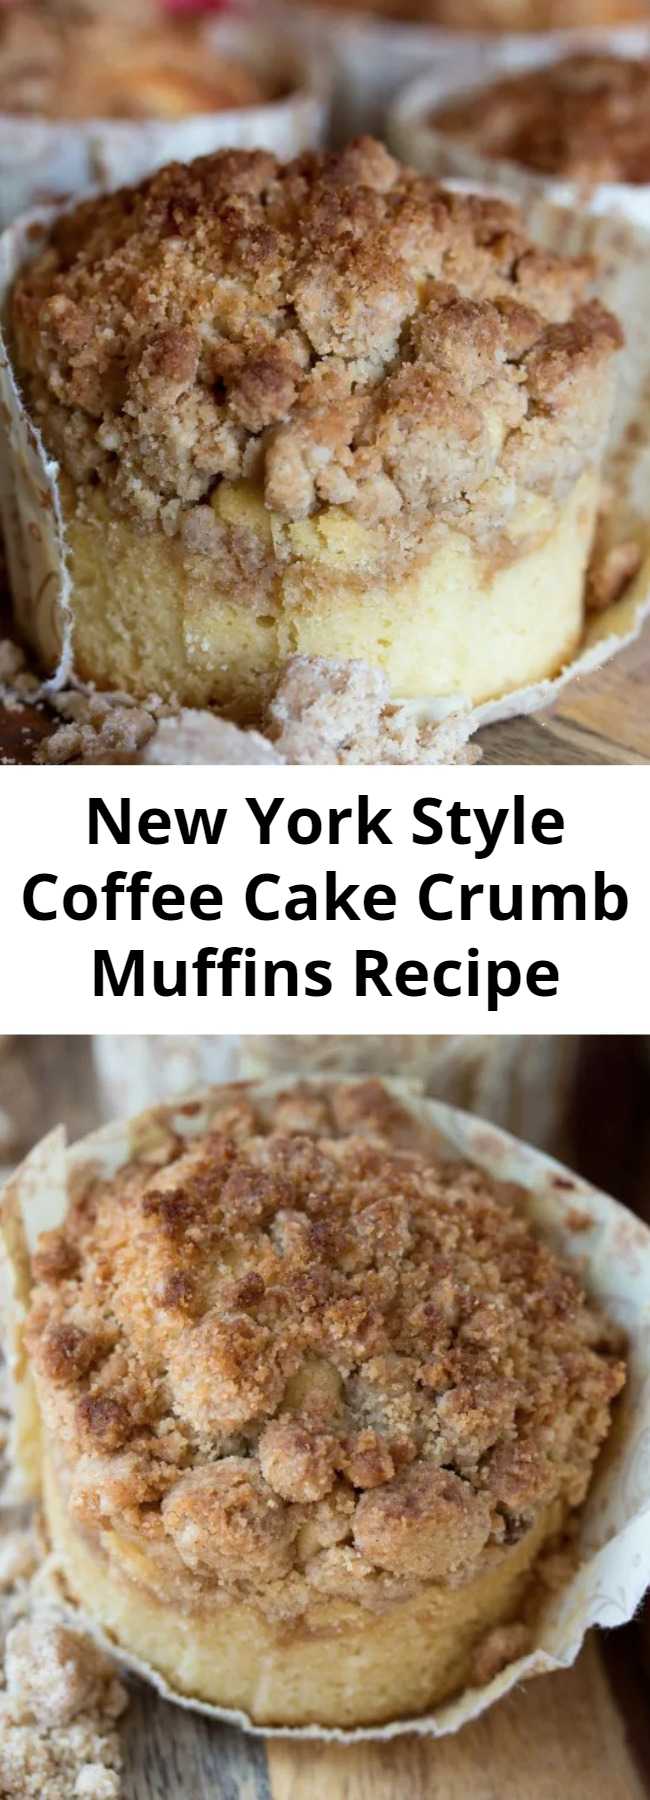 New York Style Coffee Cake Crumb Muffins Recipe - If there is crumb in the name for crumb muffins, you better believe there should be a lot of crumb on top!